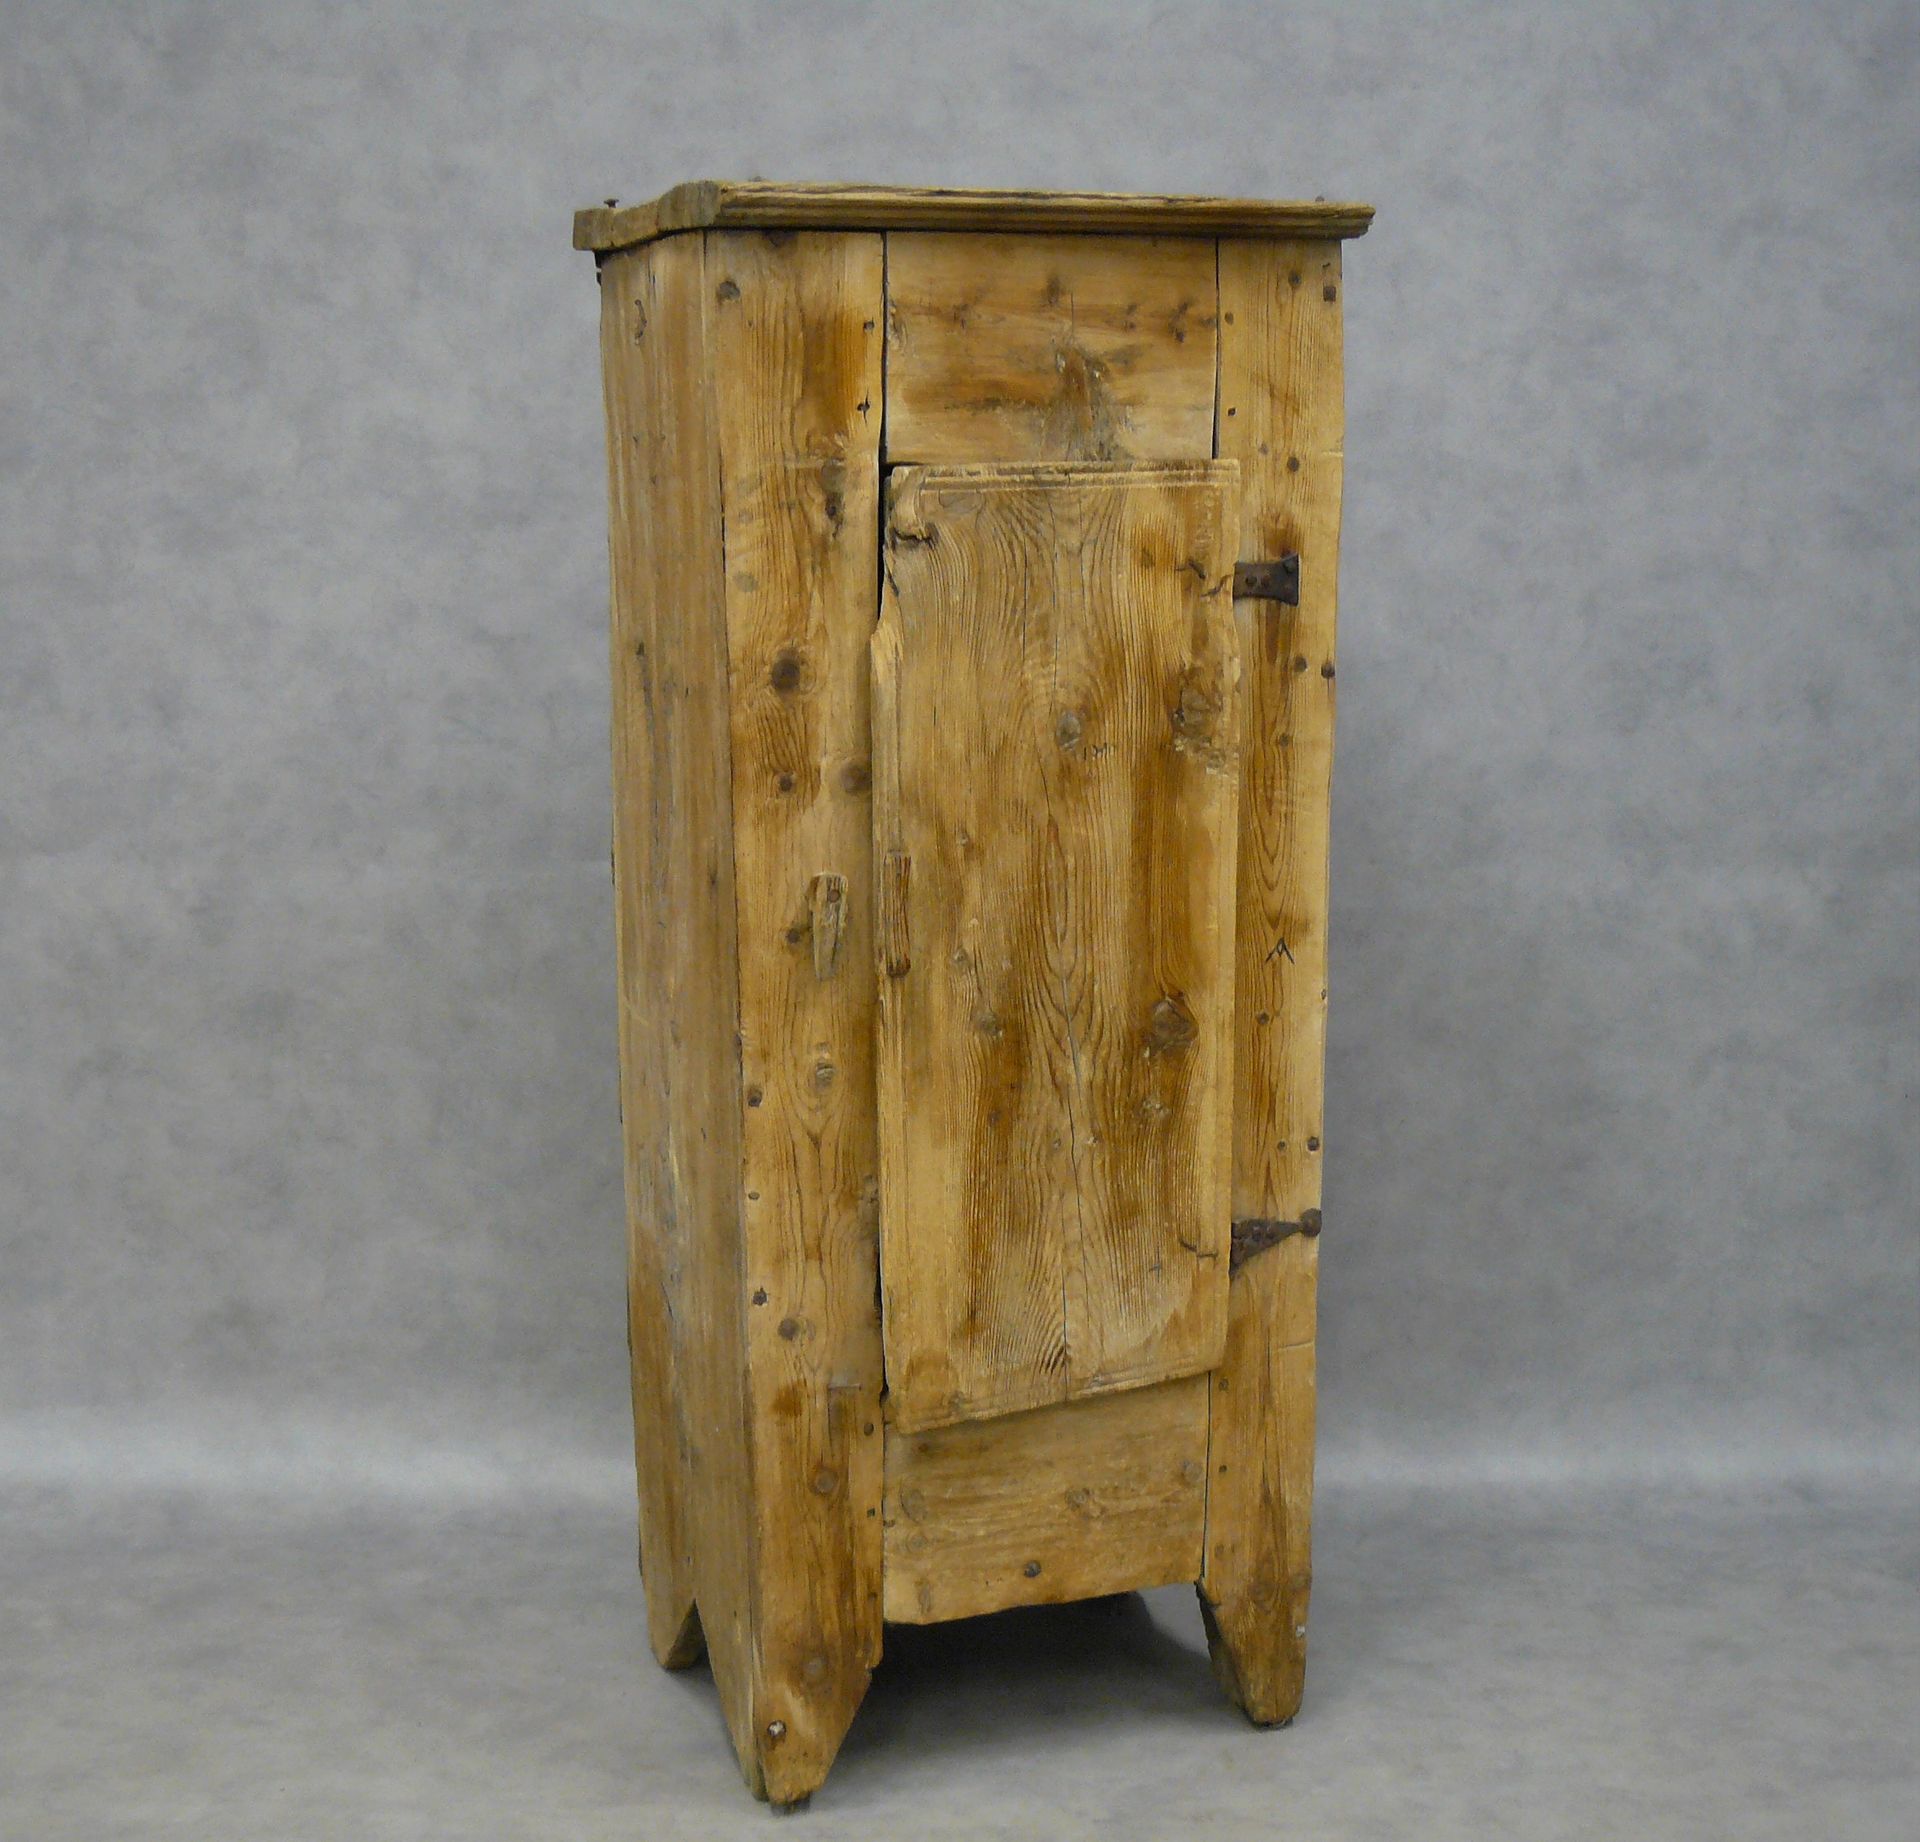 Null a small rustic cupboard, in pine wood and opening by a door - 148 x 63 x 46&hellip;